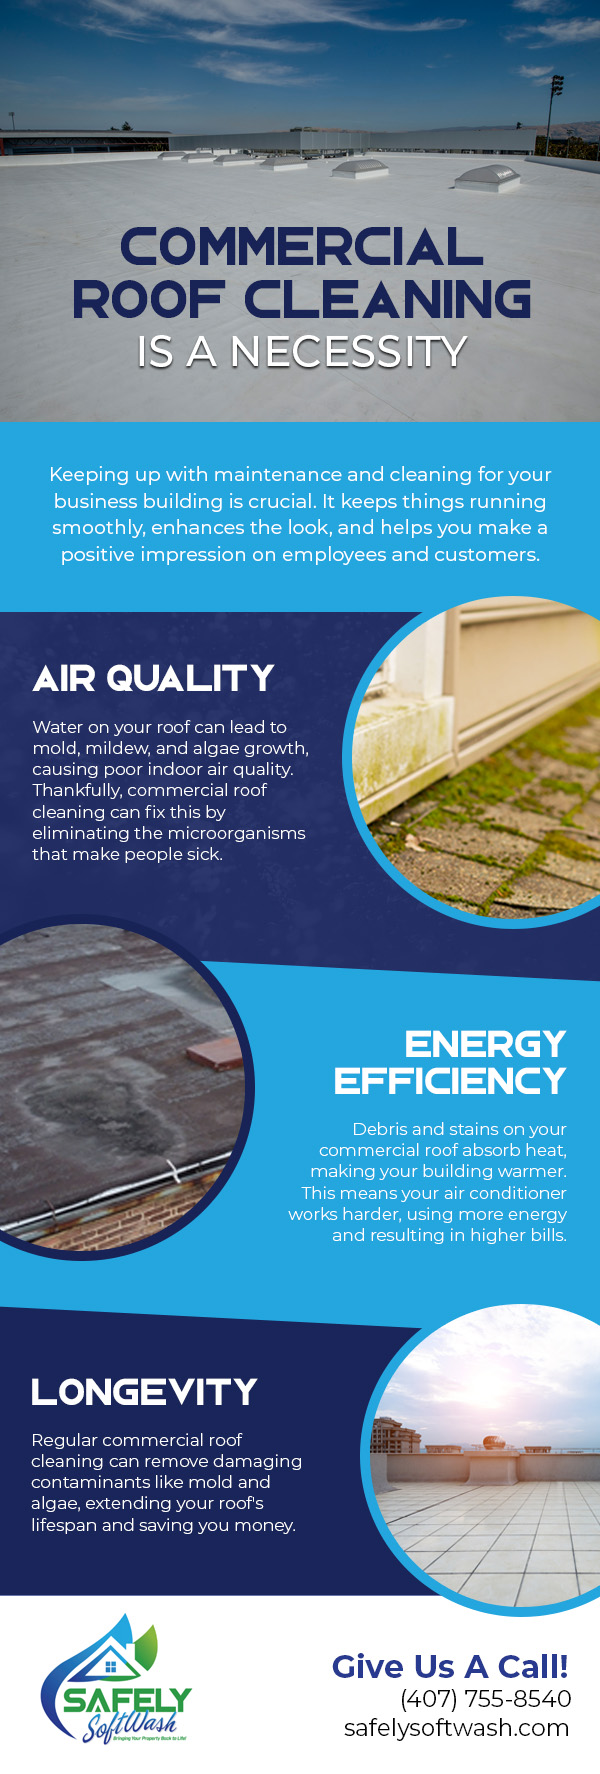 Commercial roof cleaning yields many benefits.